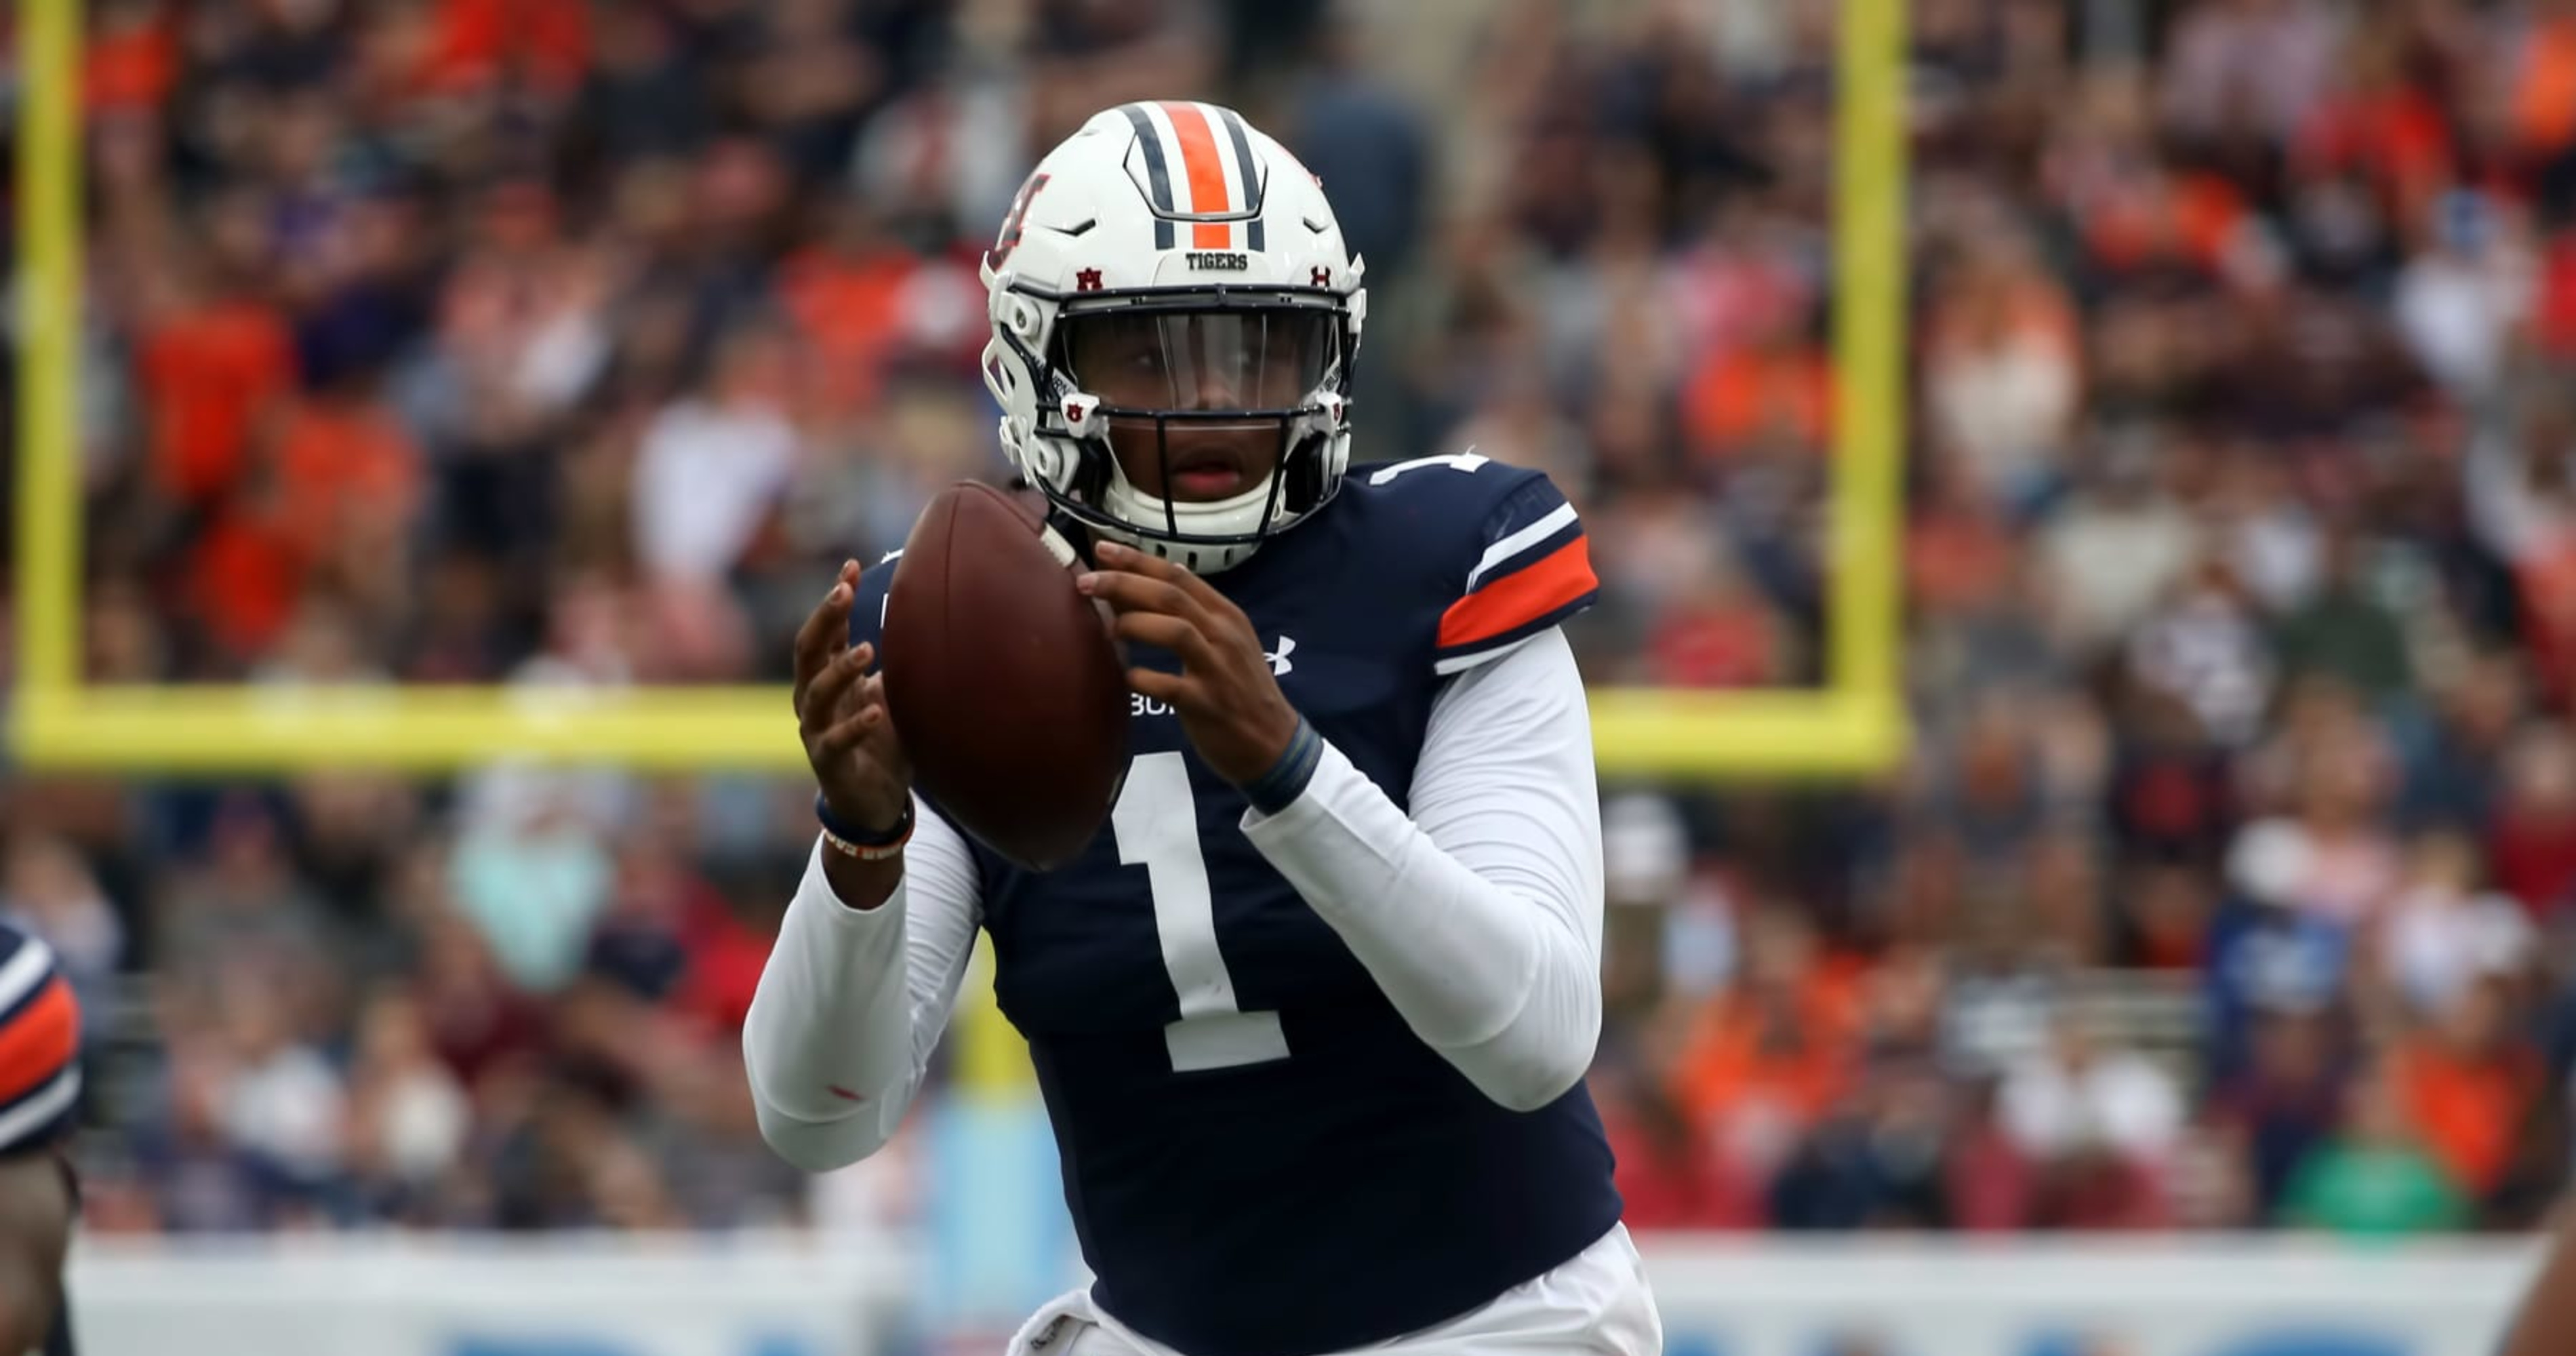 Auburn QB T.J. Finley Arrested on Charge of Attempting to Elude Police